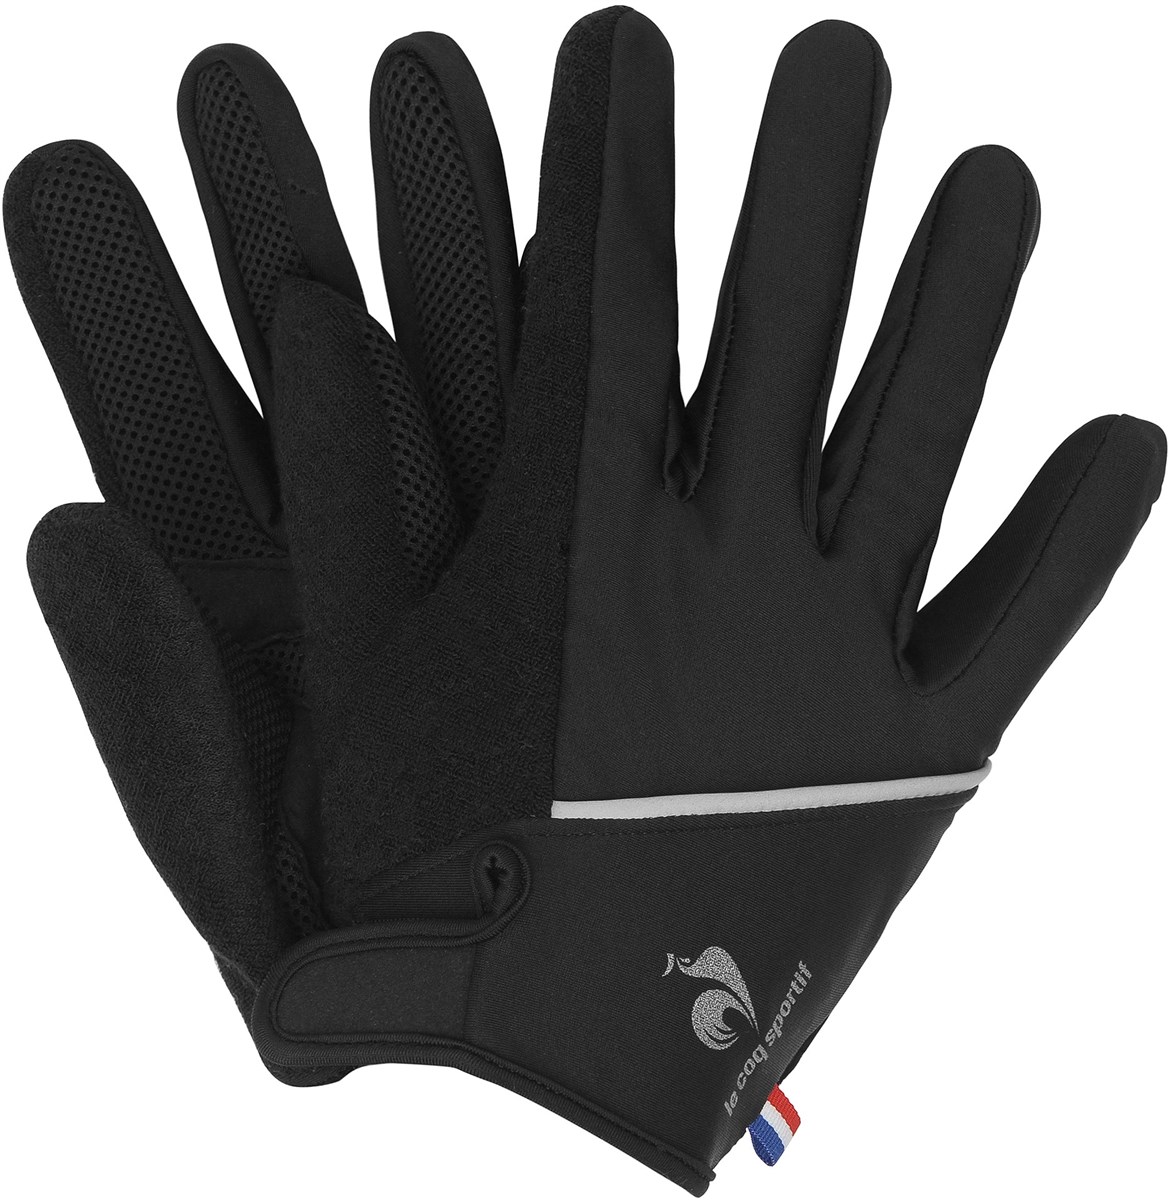 Le Coq Sportif Resson Long Finger Cycling Gloves product image